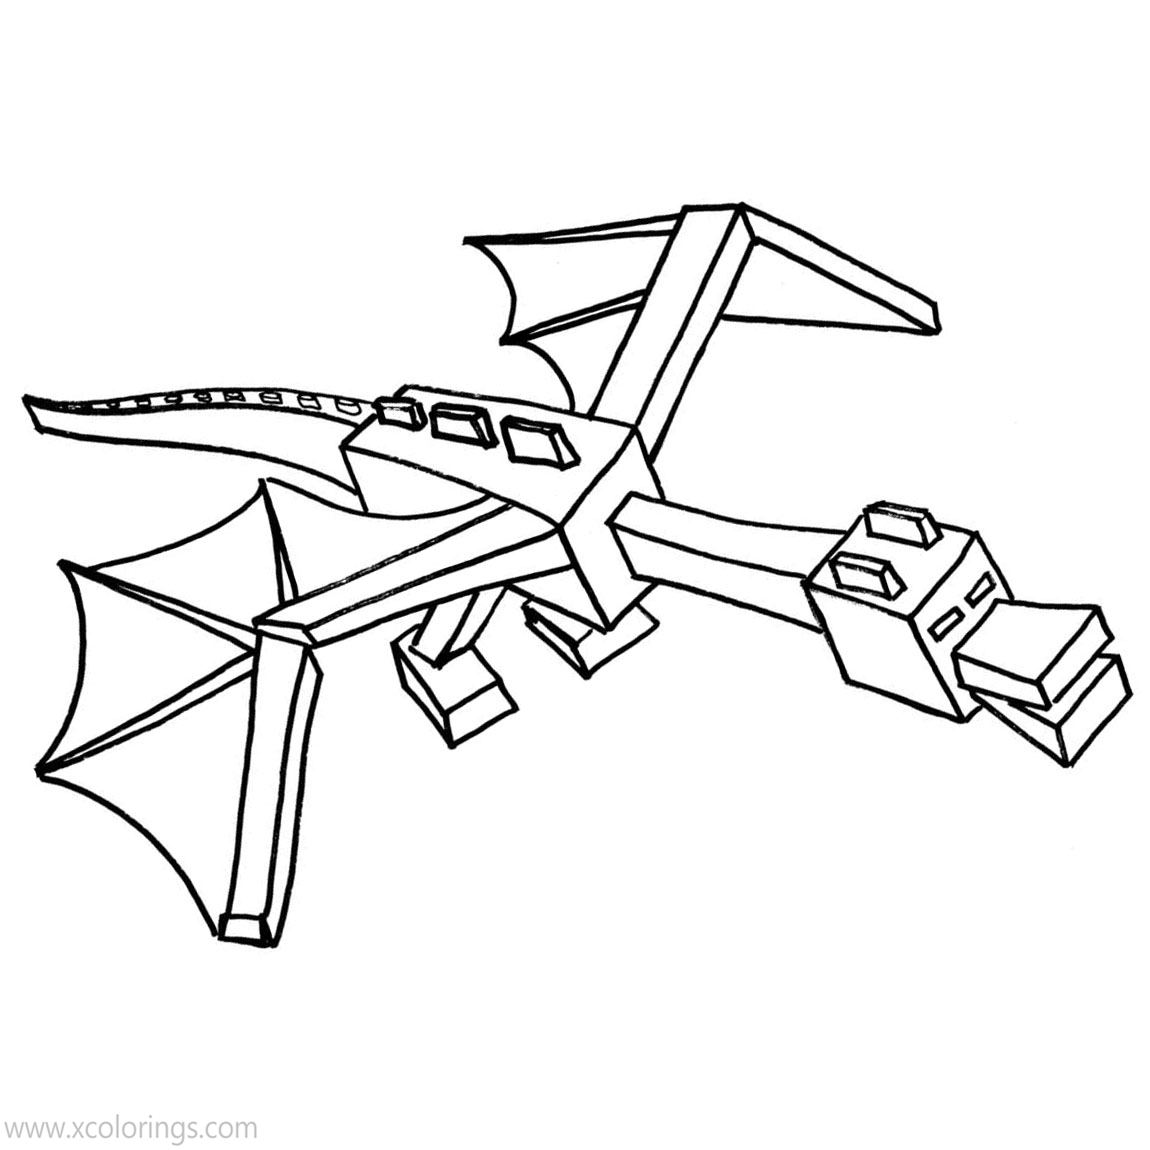  Ender Dragon Coloring Pages  Line Drawing XColorings com